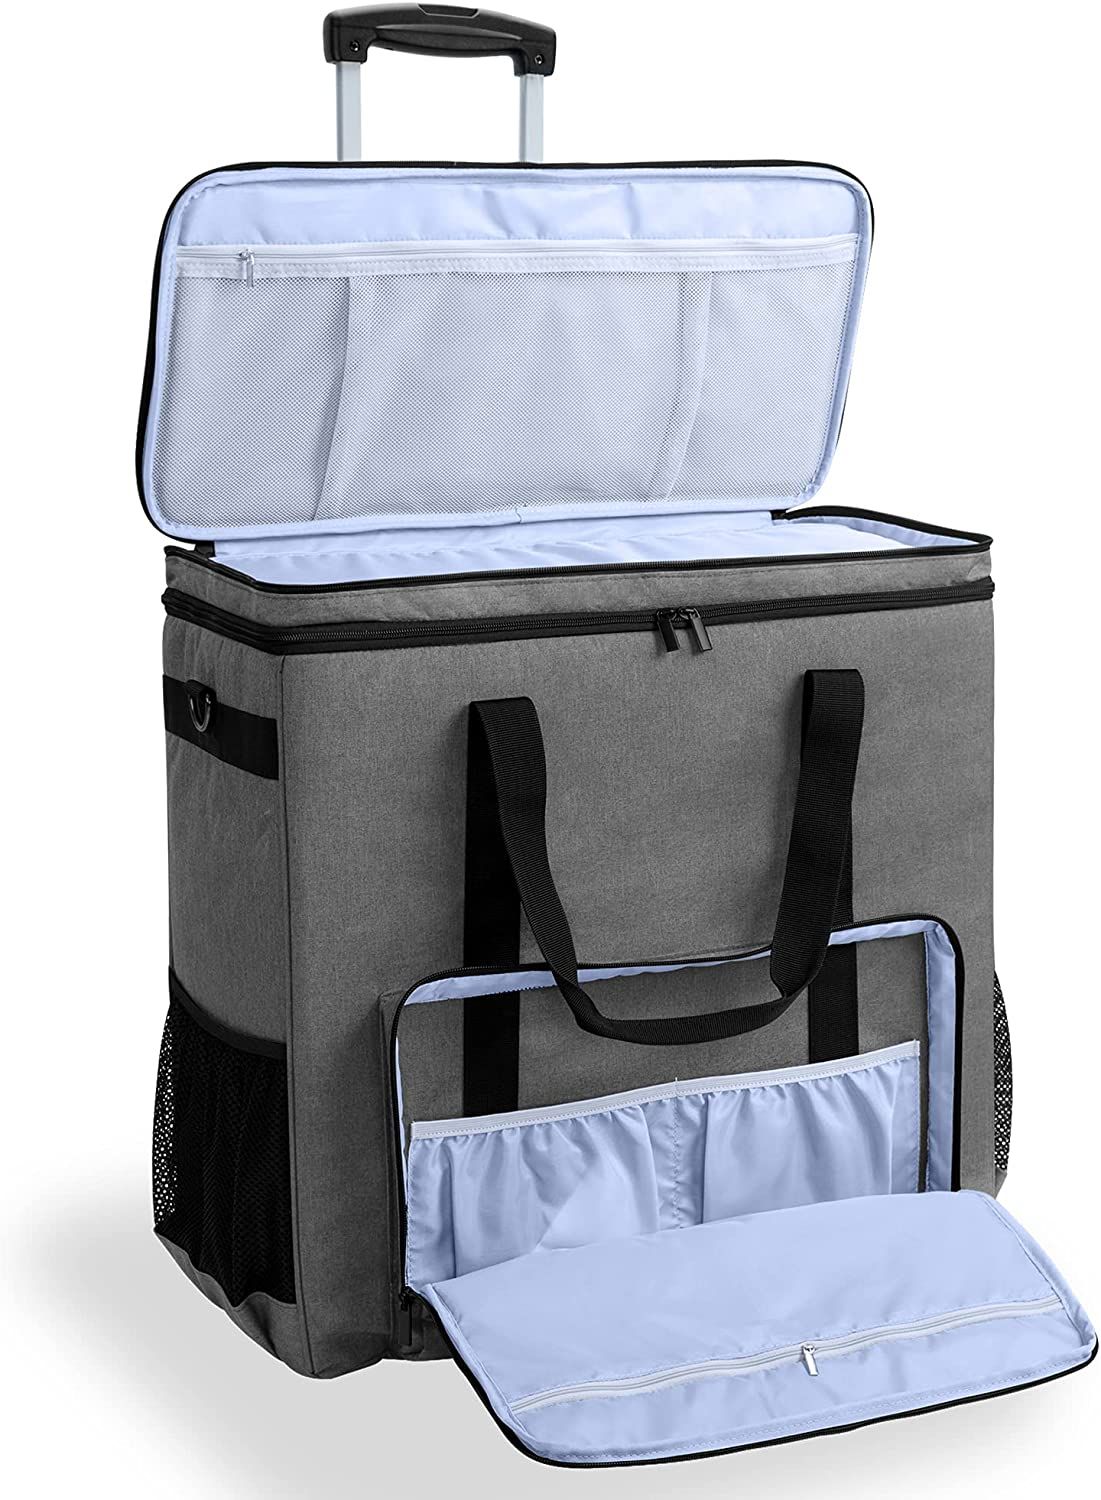 The CURMIO Rolling Desktop Computer Carrying Case with its main and front pouches open, showing their soft, double-lining.